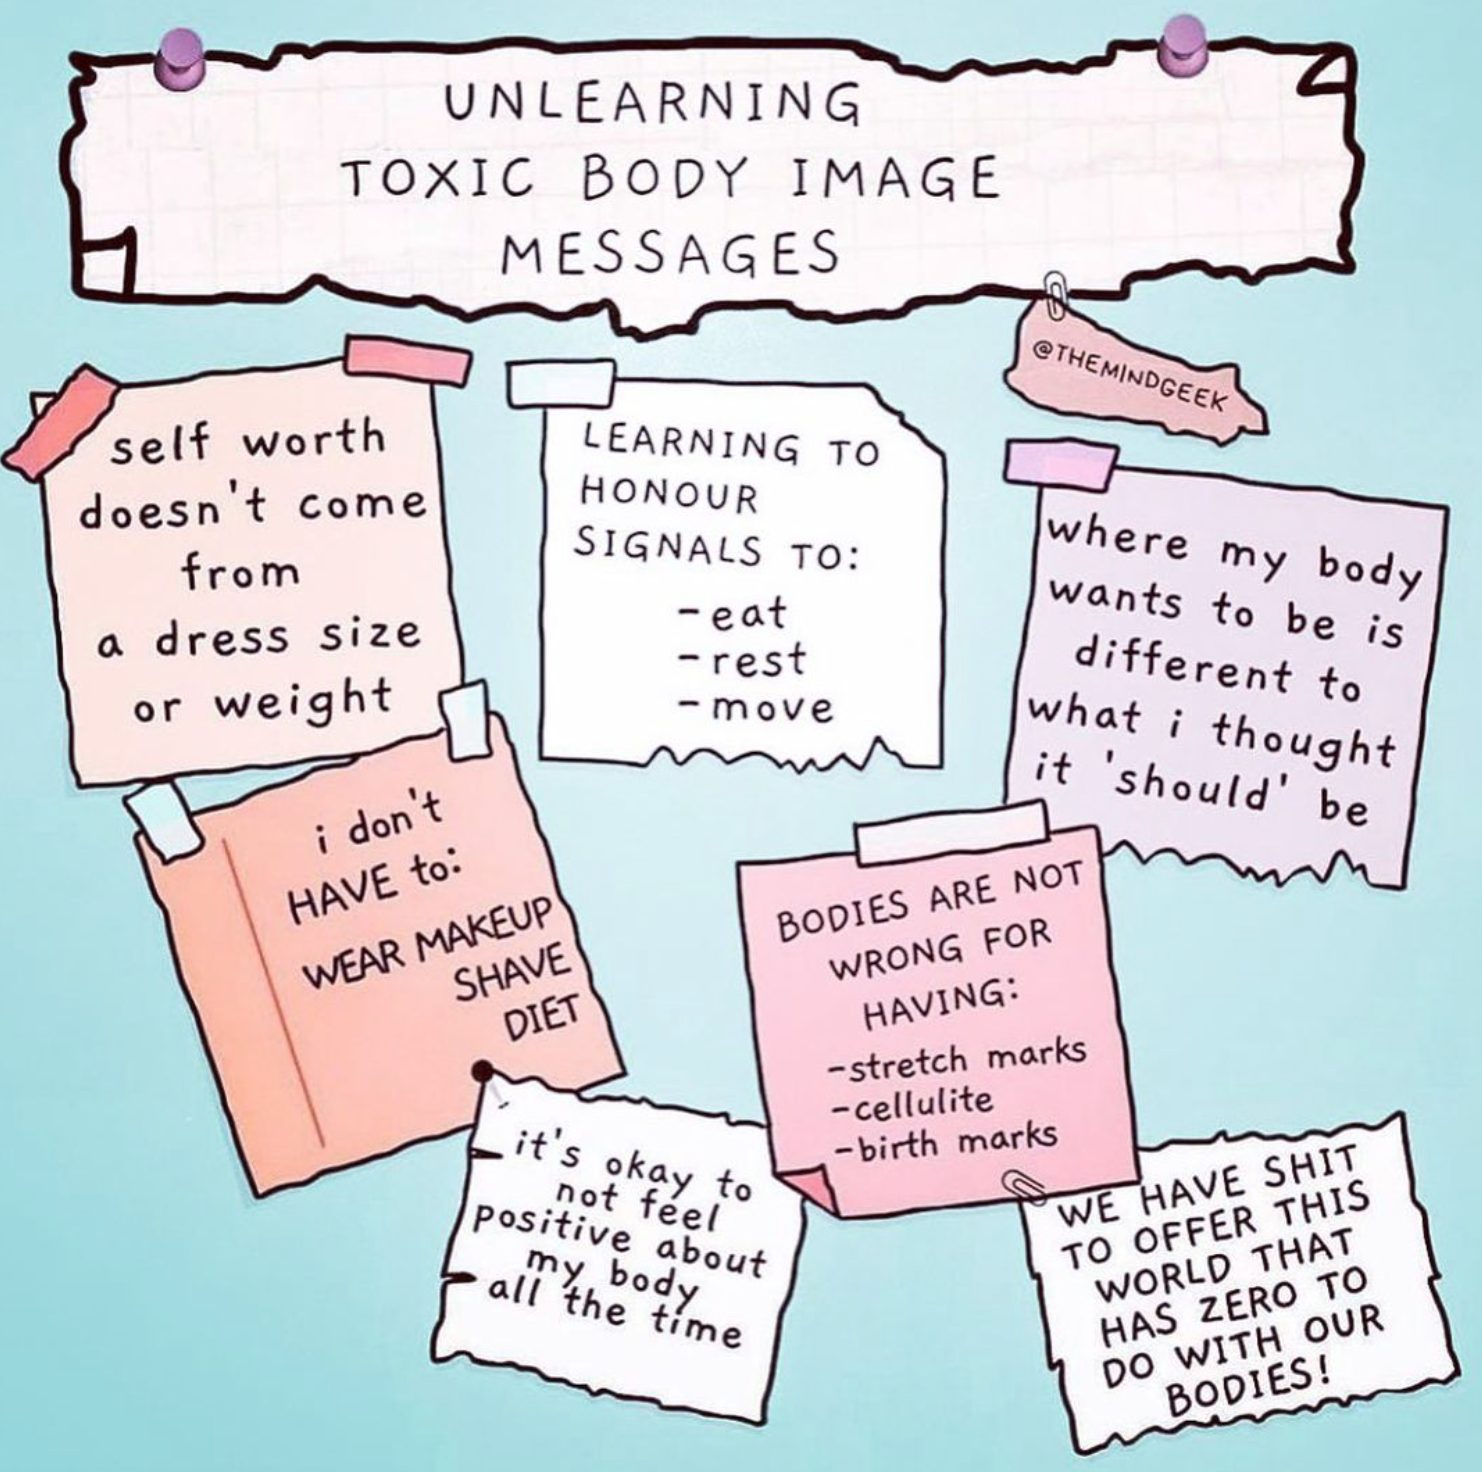 Unlearning toxic body image messages